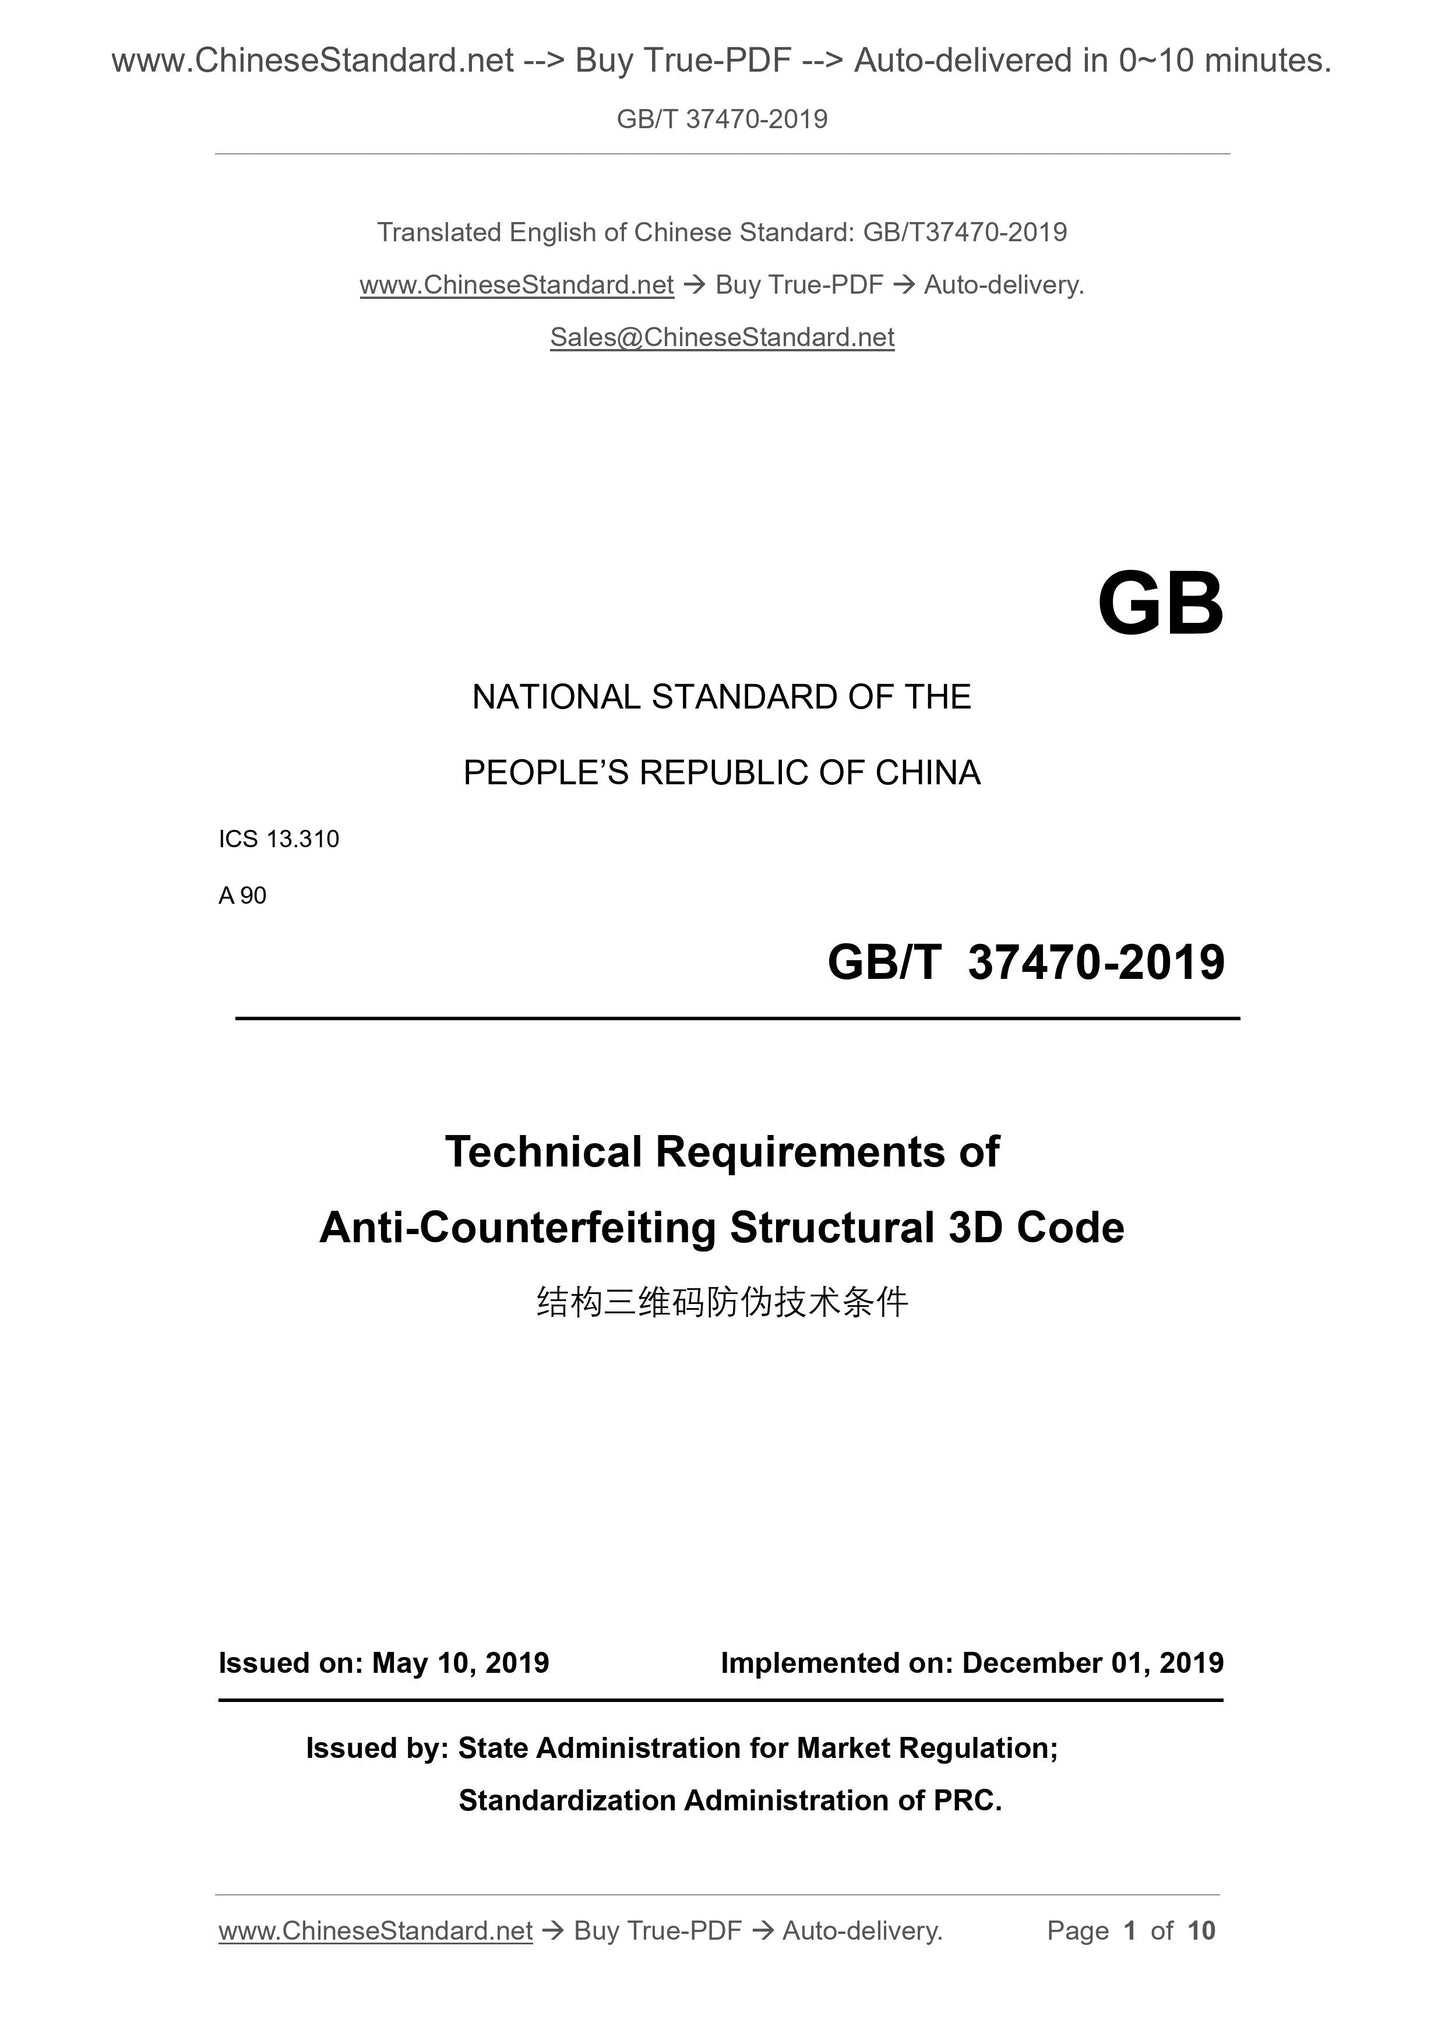 GB/T 37470-2019 Page 1